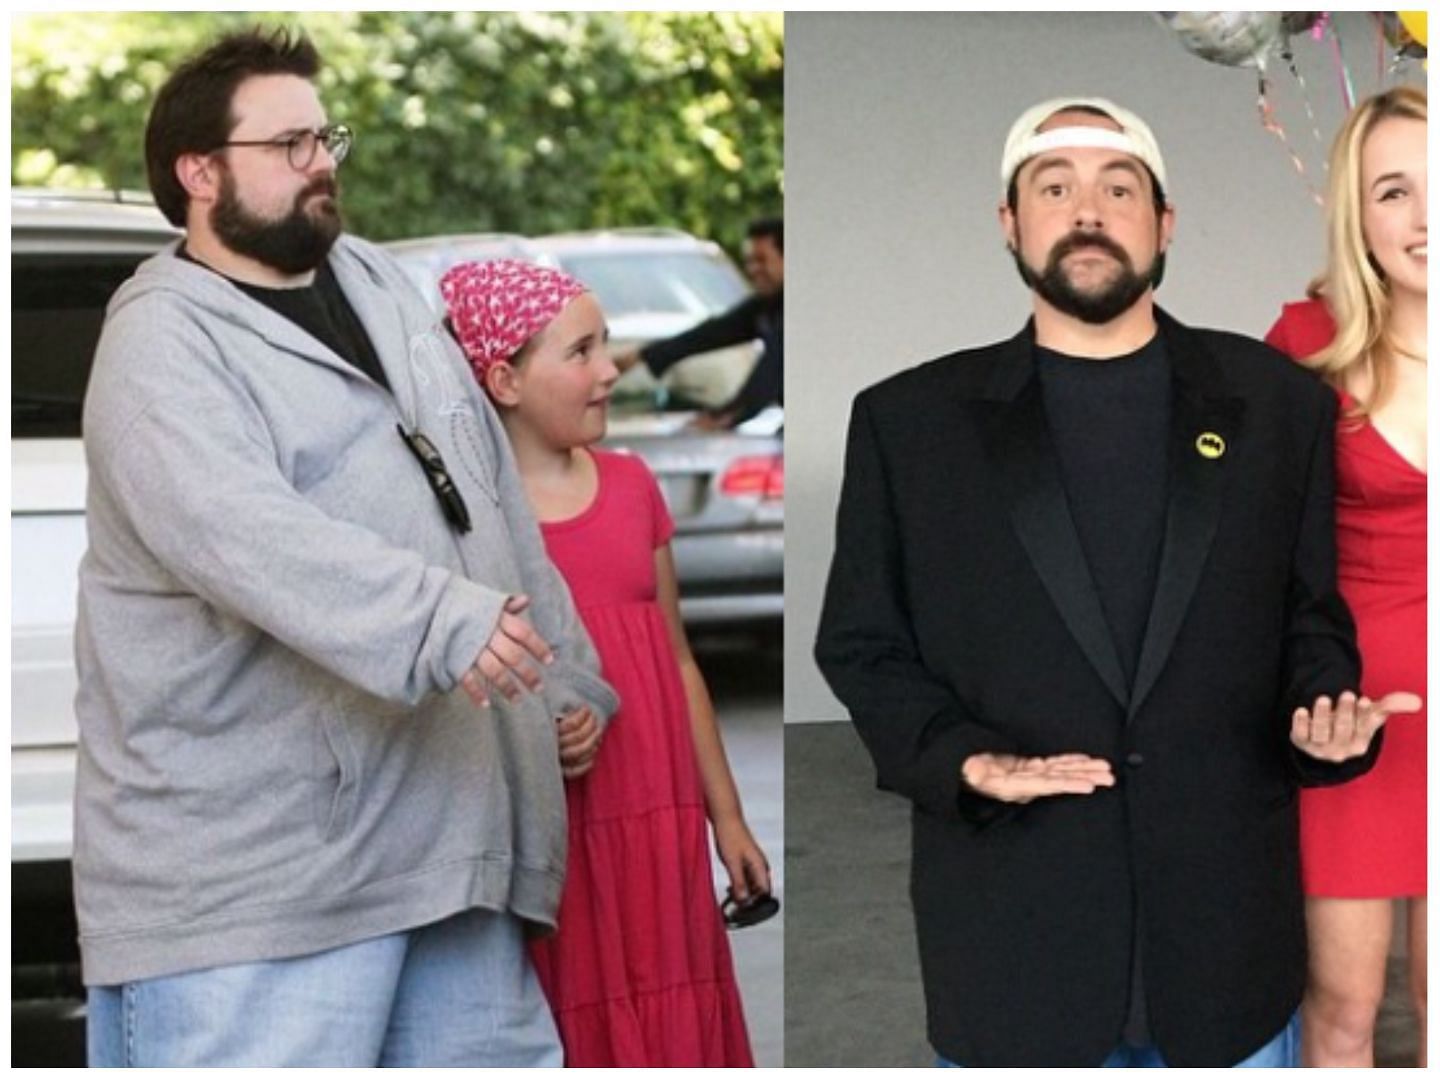 Kevin Smith adopted a vegan lifestyle that helped him reduce his weight &amp; provided other health benefits. (Image via Instagram @thekevinsmith)